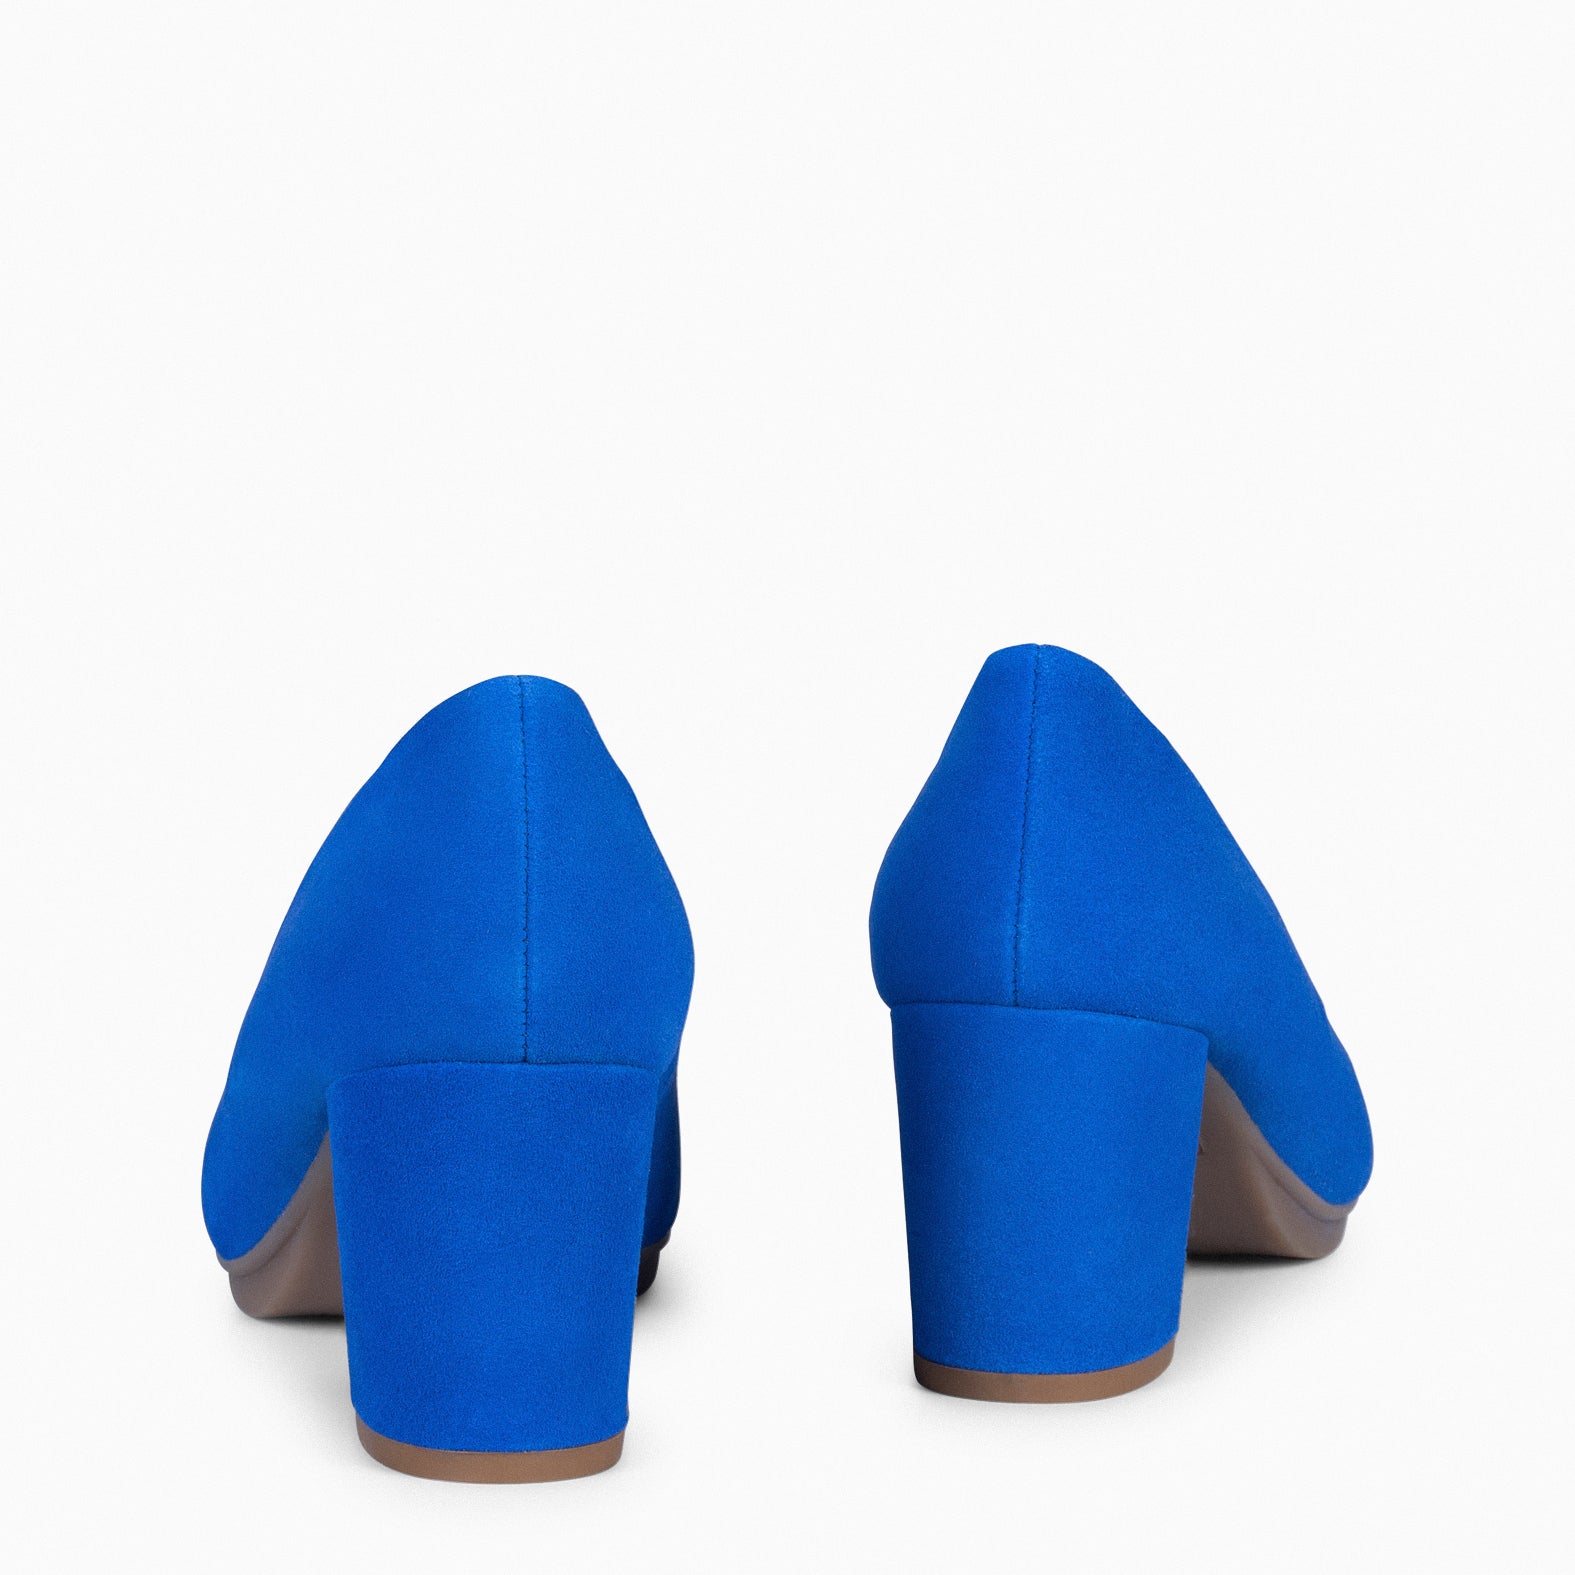 URBAN S – ELECTRIC BLUE Suede Mid-Heeled Shoes 